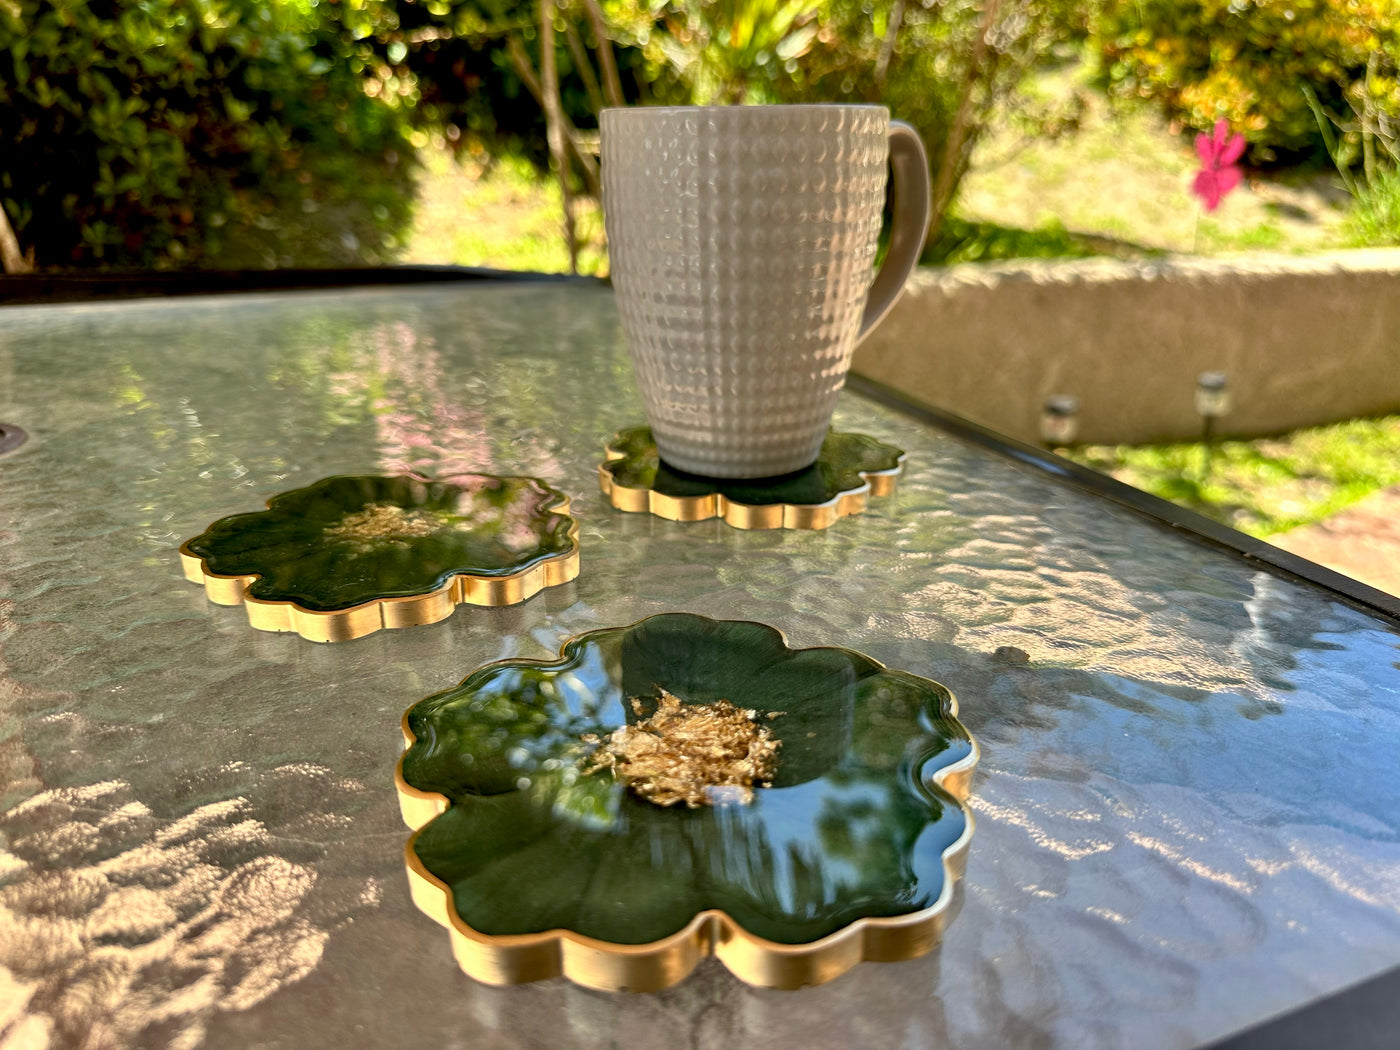 Handmade Forest Olive Green and Gold Resin Flower Shaped Coasters Set - Jasmin Renee Art - Three Coasters Gold Rim Edges with Cup on Table